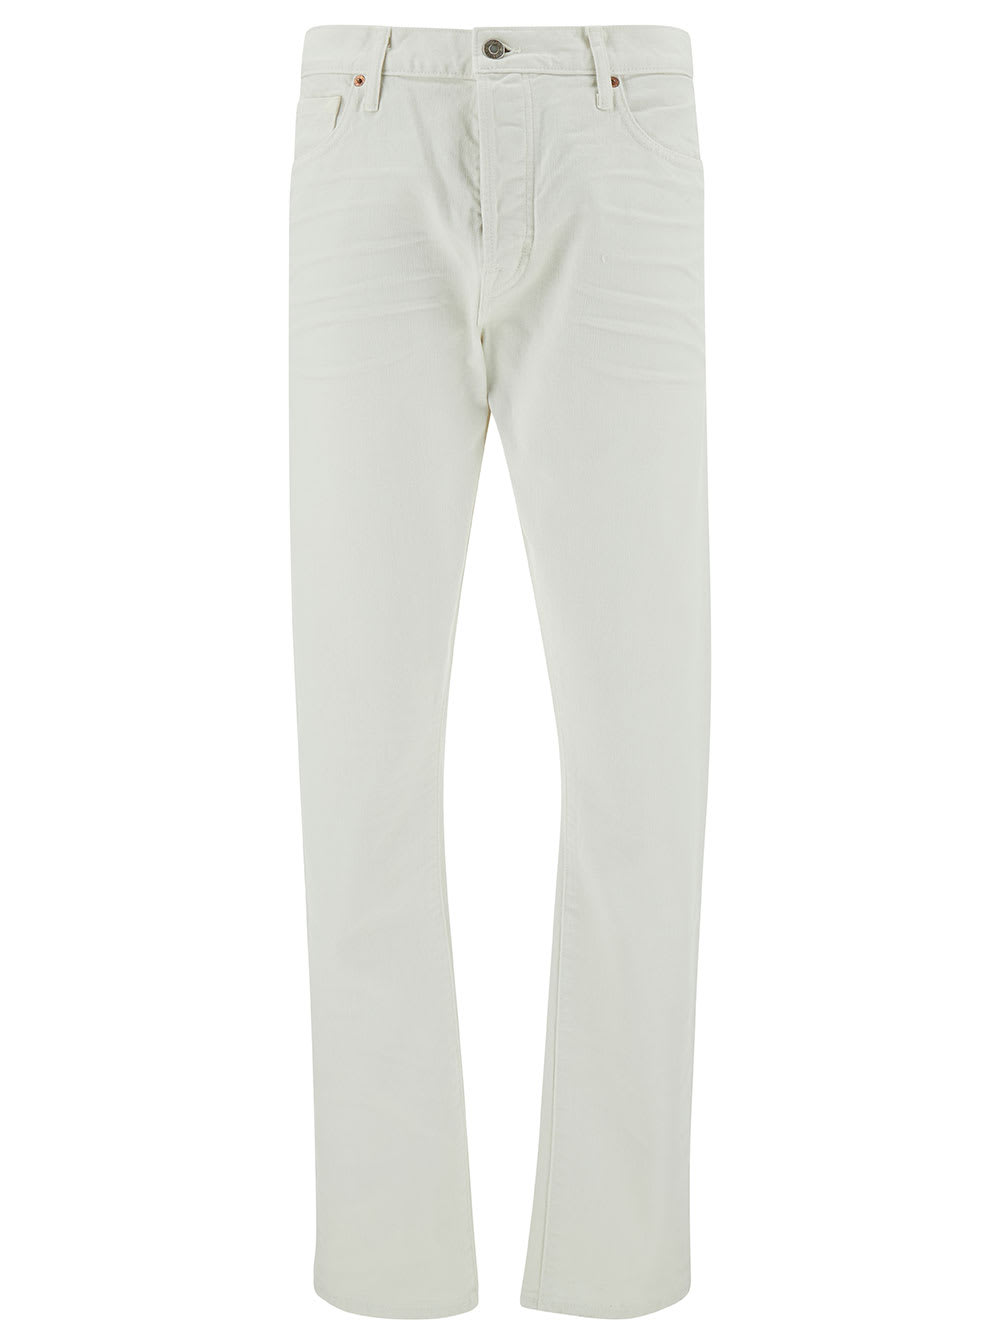 White Slim Five-pocket Style Jeans With Branded Button In Stretch Cotton Denim Man